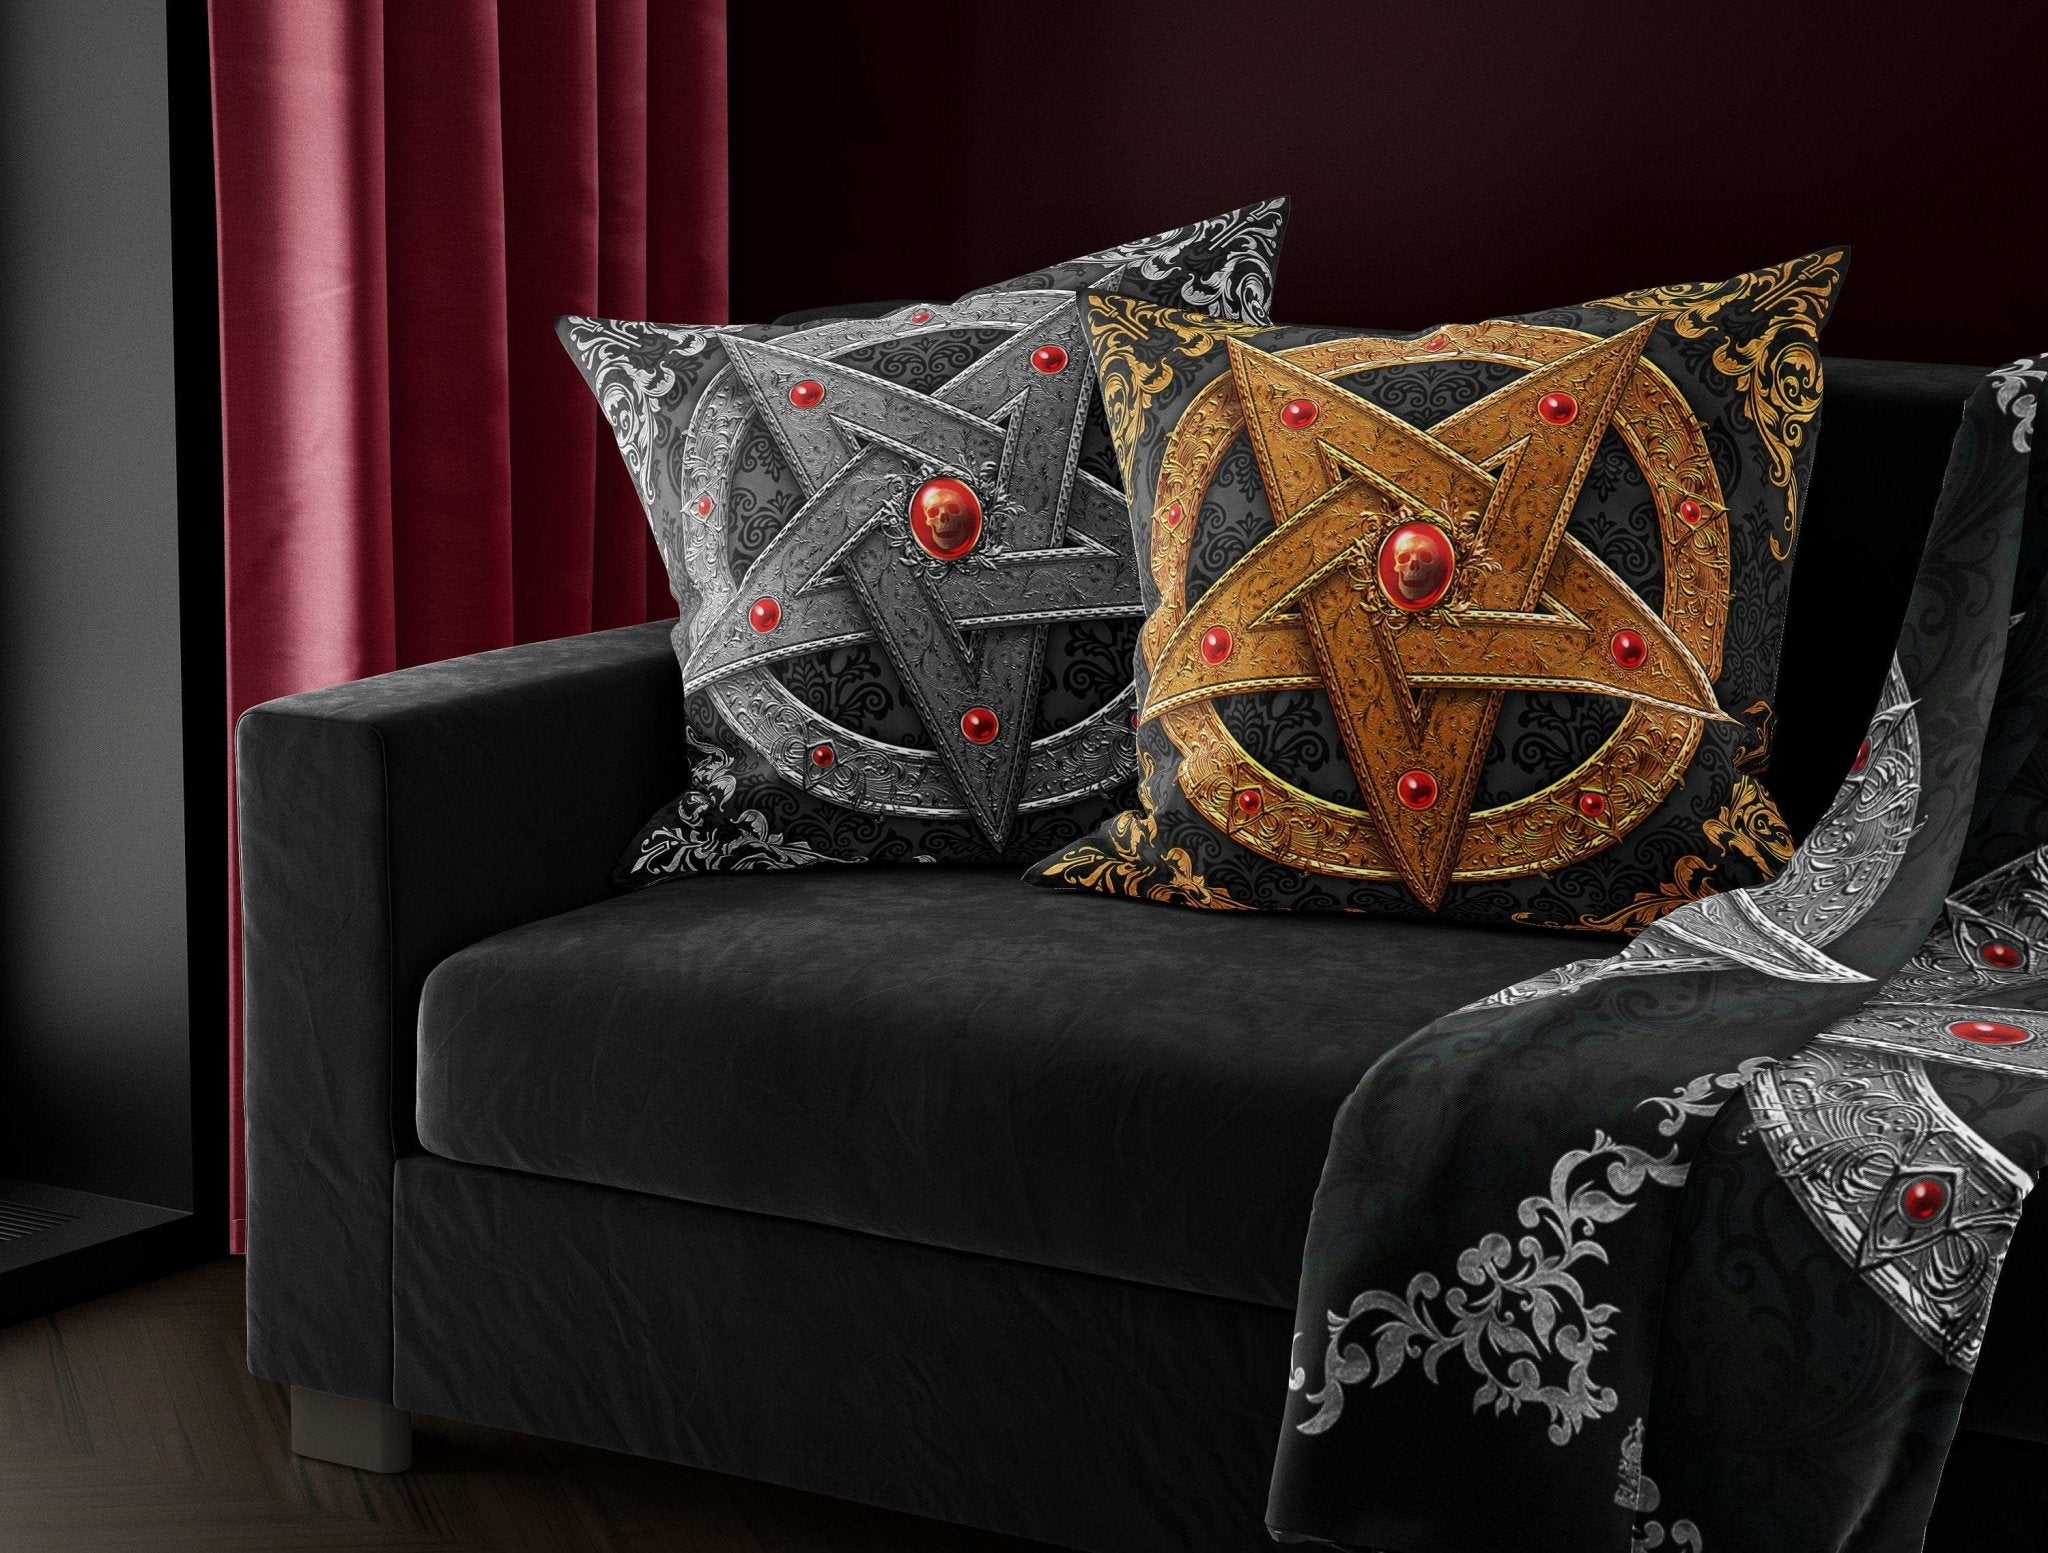 Pentagram Throw Pillow, Decorative Accent Cushion, Goth Home Decor, Satanic Art, Alternative, Funky and Eclectic Home - Silver - Abysm Internal